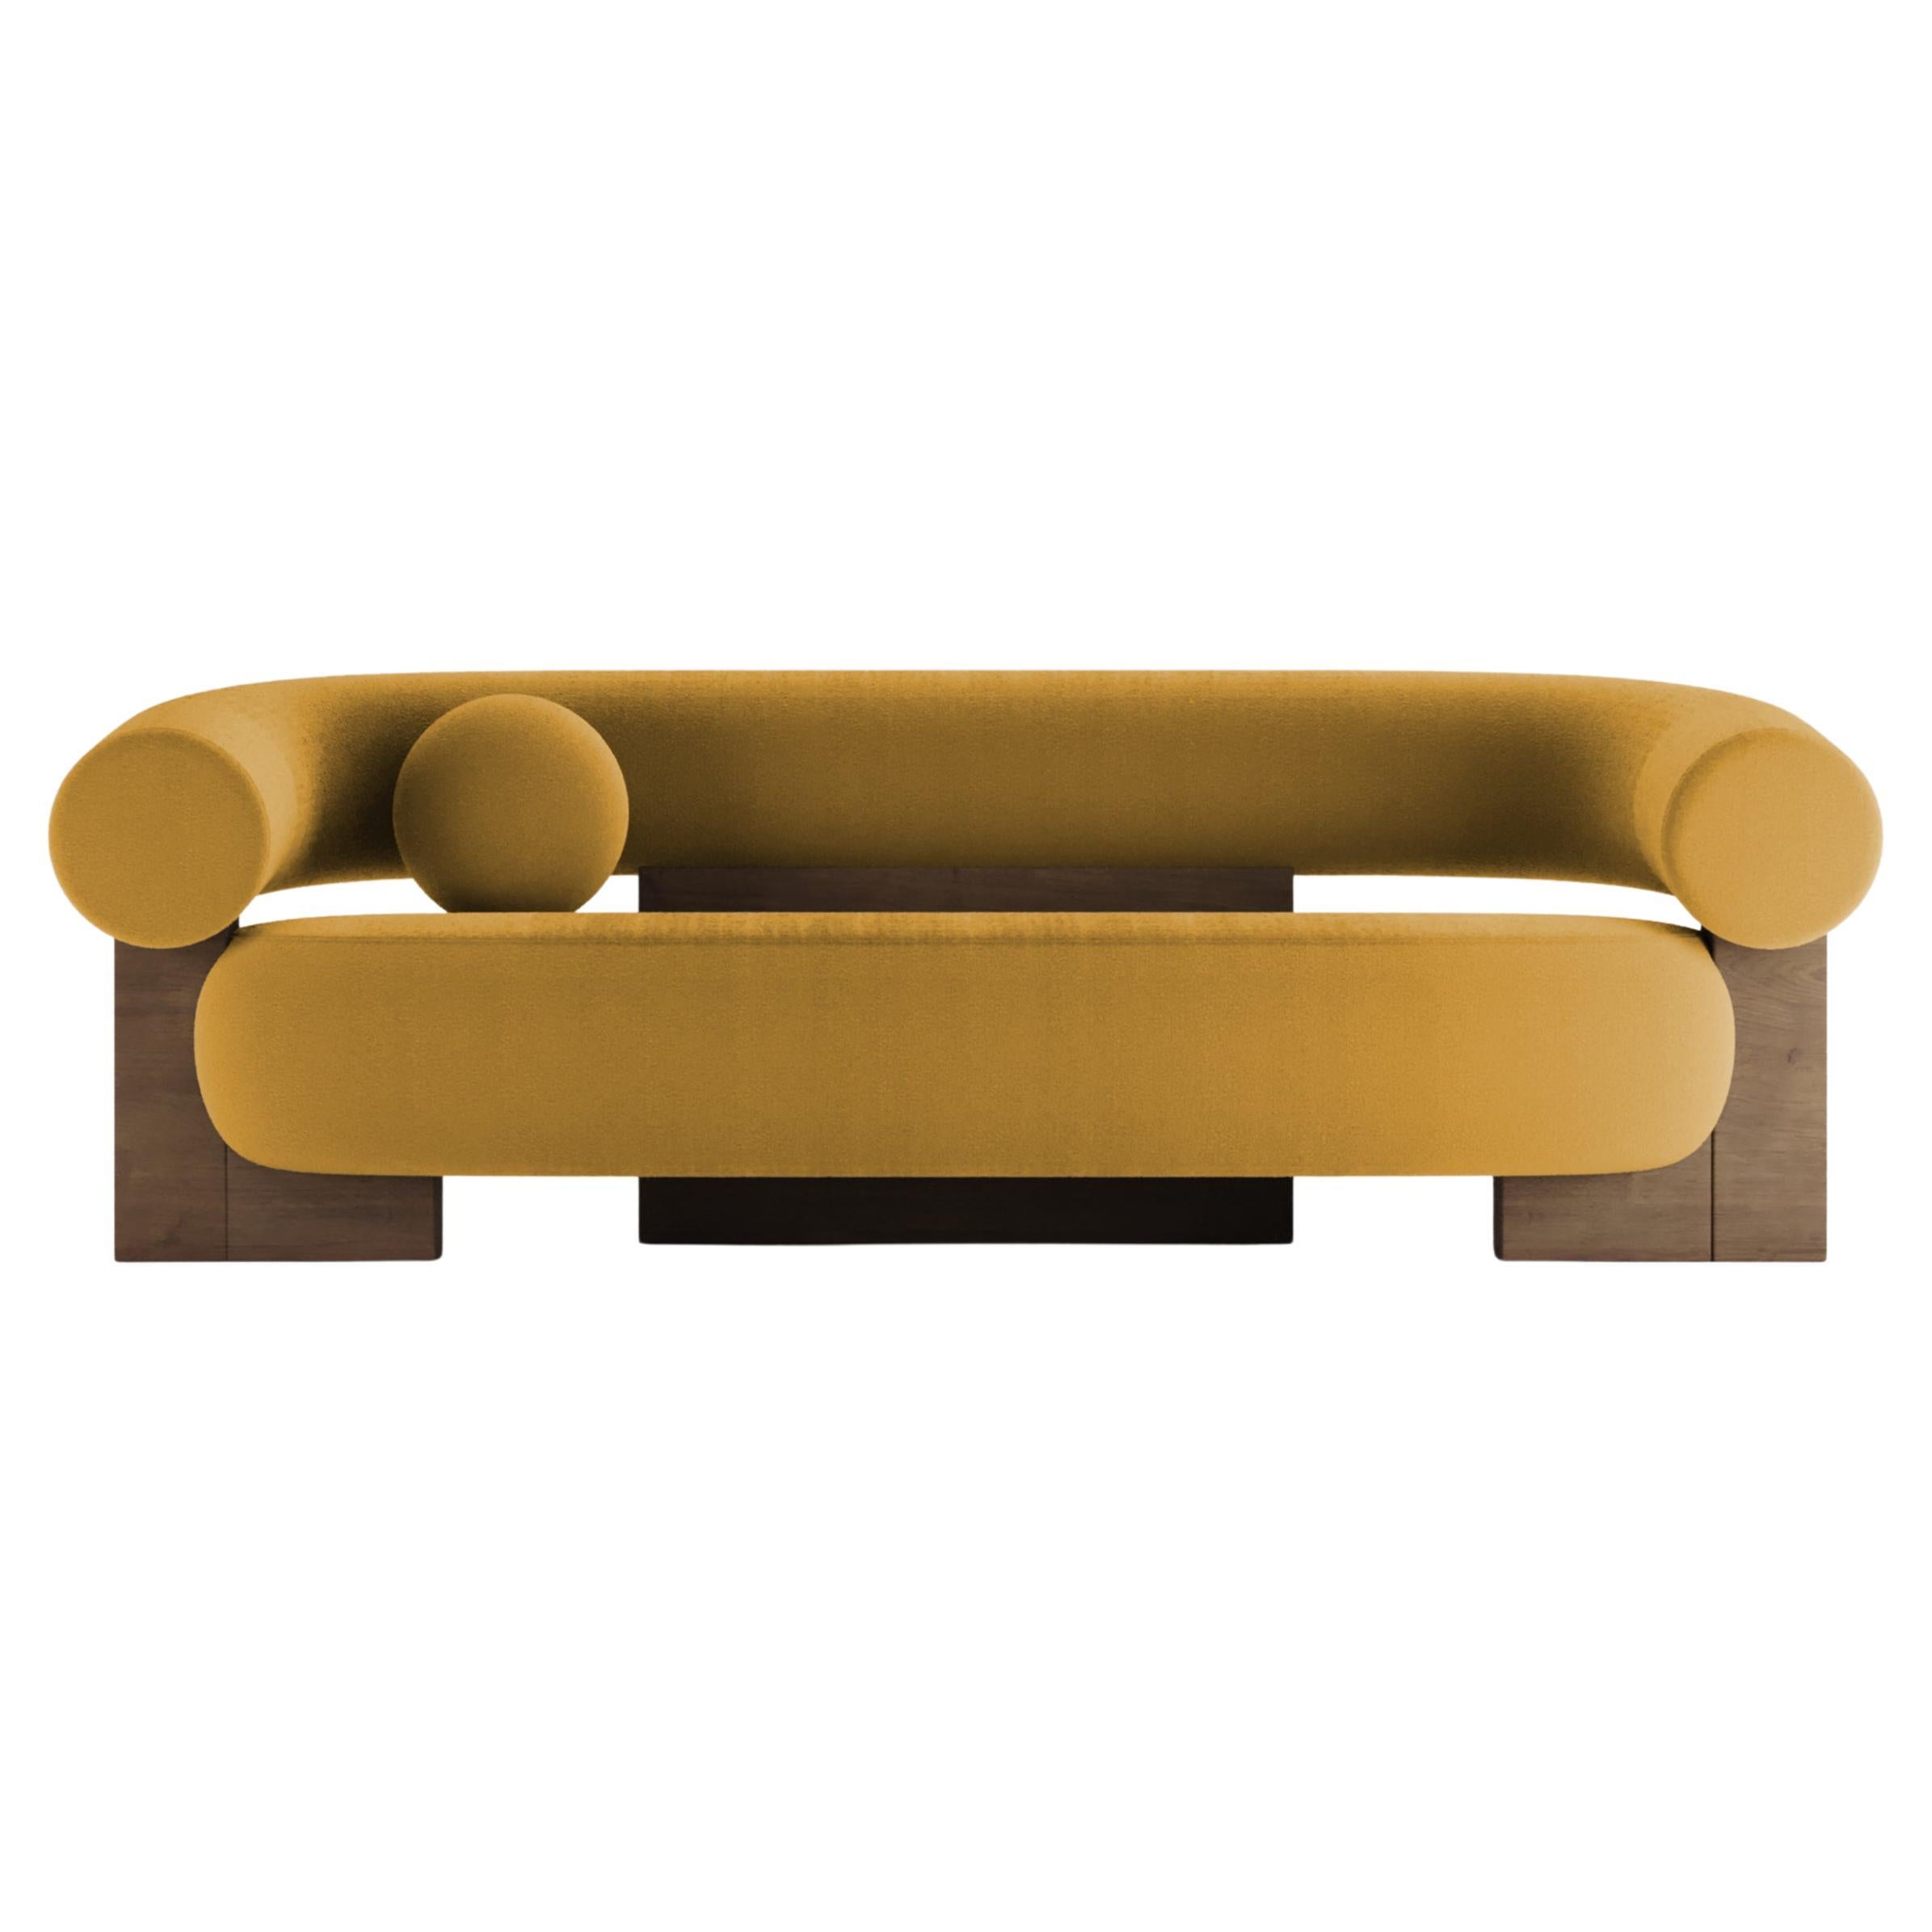 Contemporary Modern Cassete Sofa in bouclé Mustard & Wood by Collector Studio For Sale